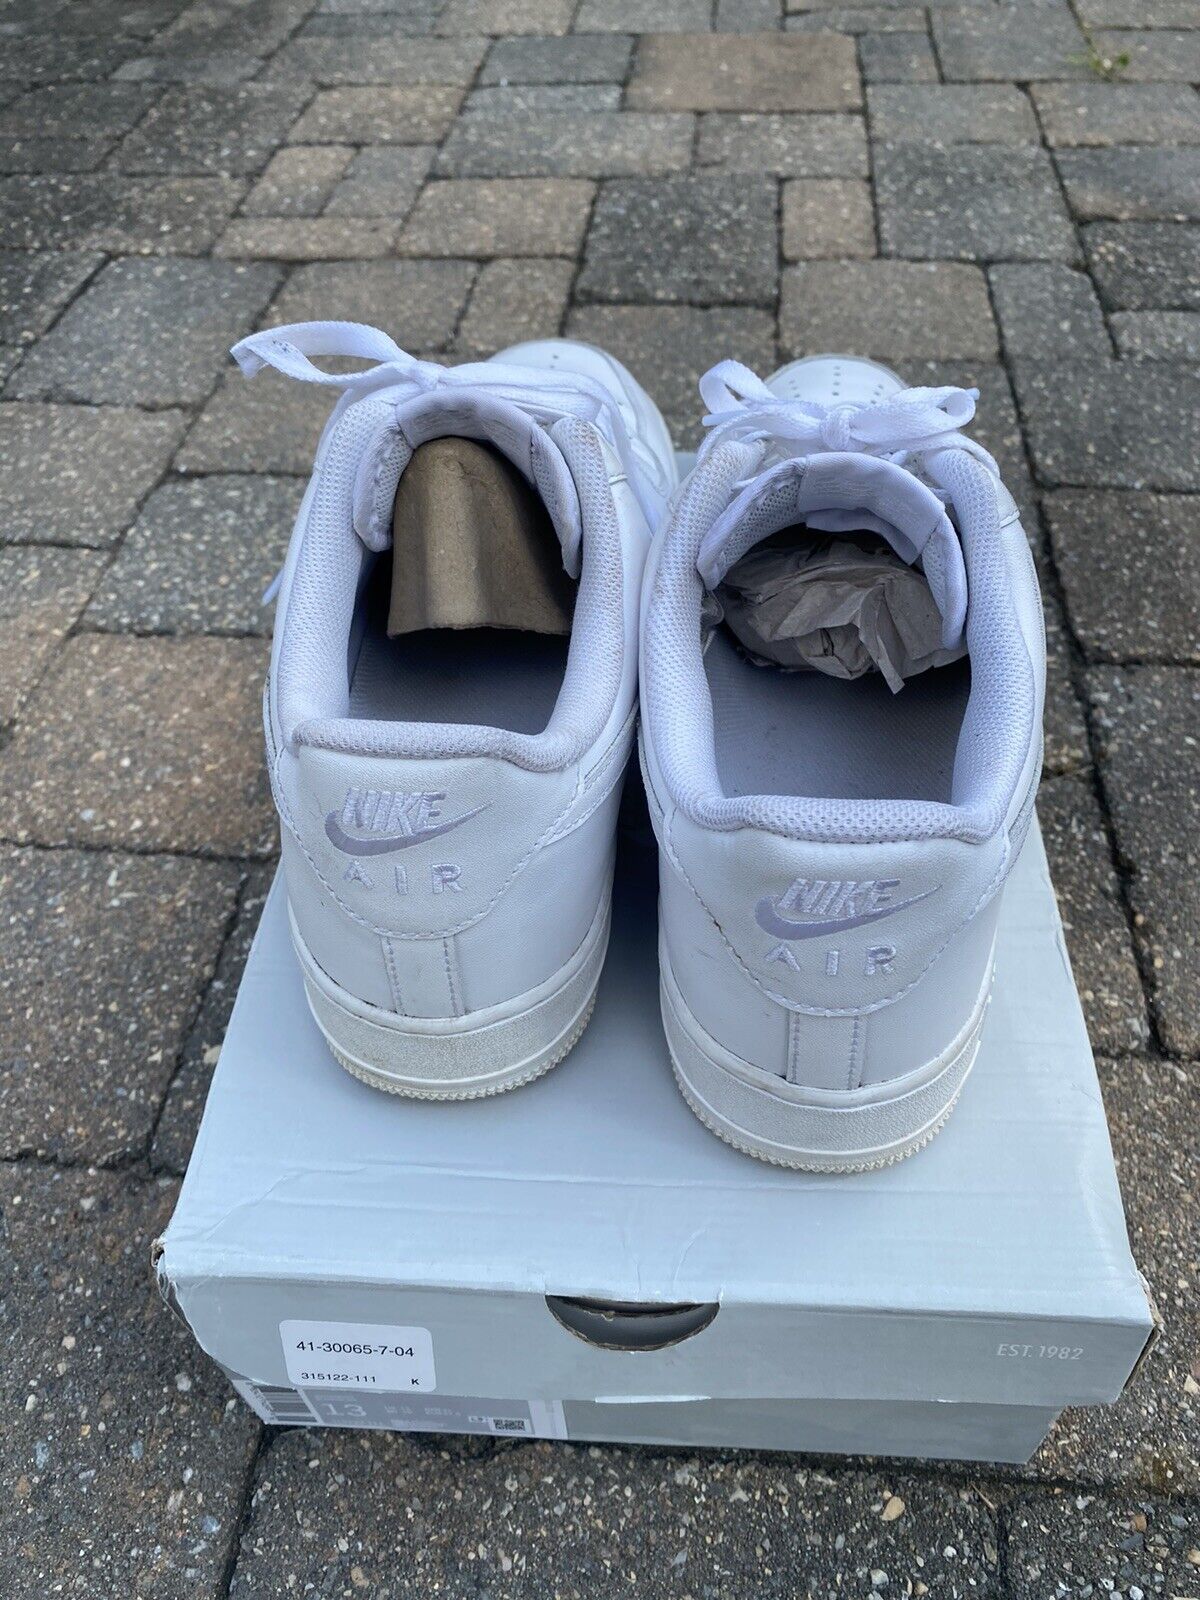 Nike Air Force 1 '07 White/White US Size 13 Authentic In Original Box